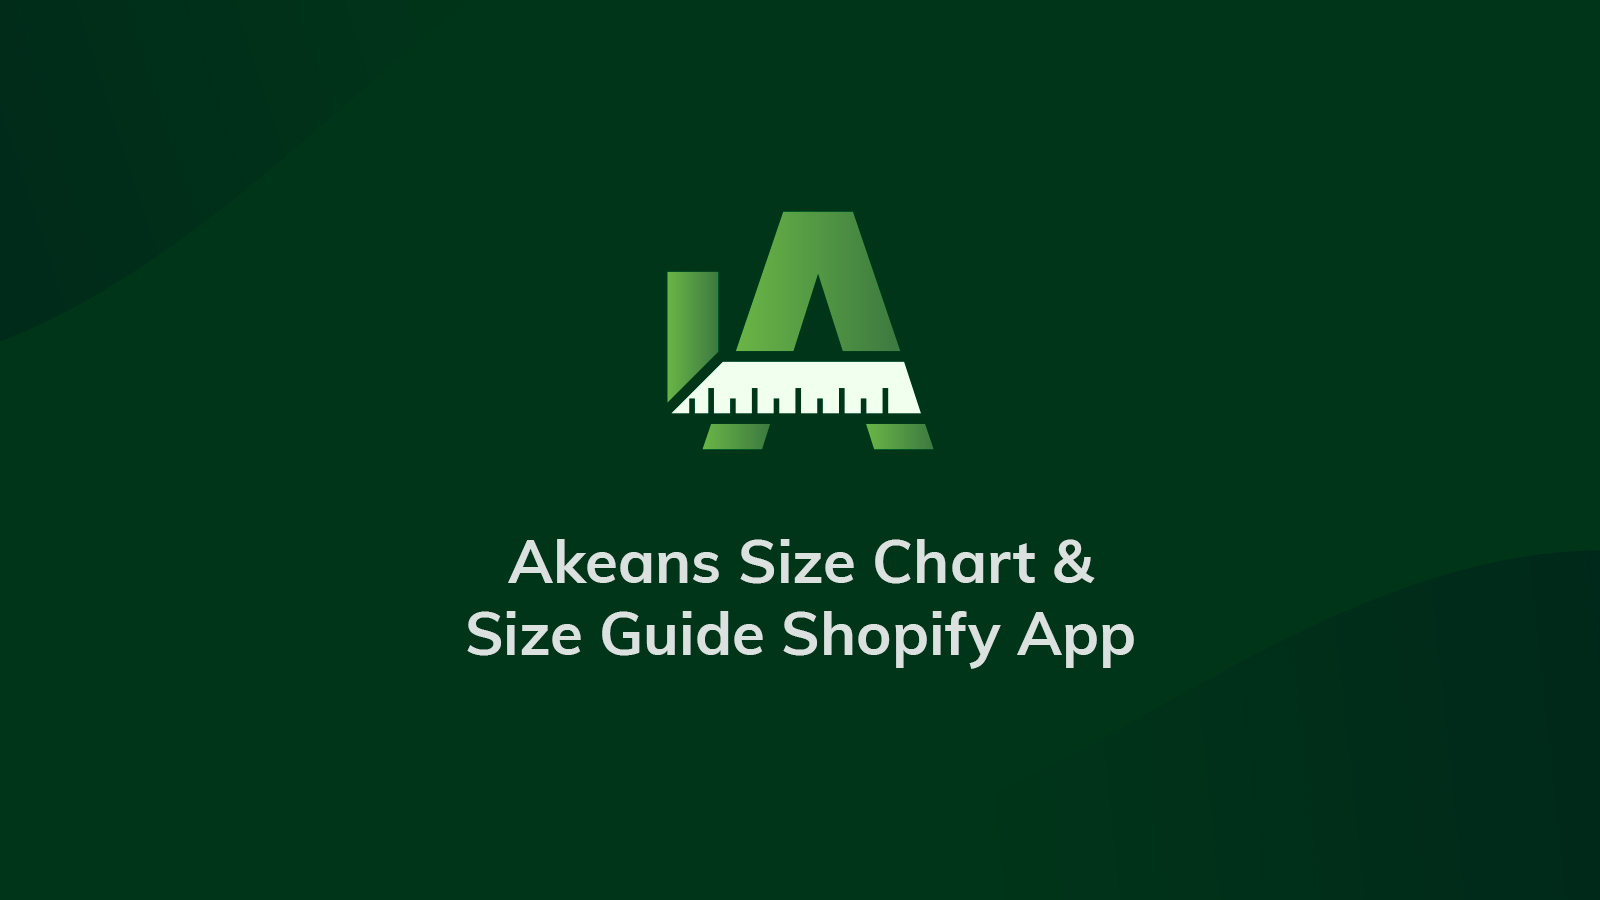 Easy Size Chart by Akeans